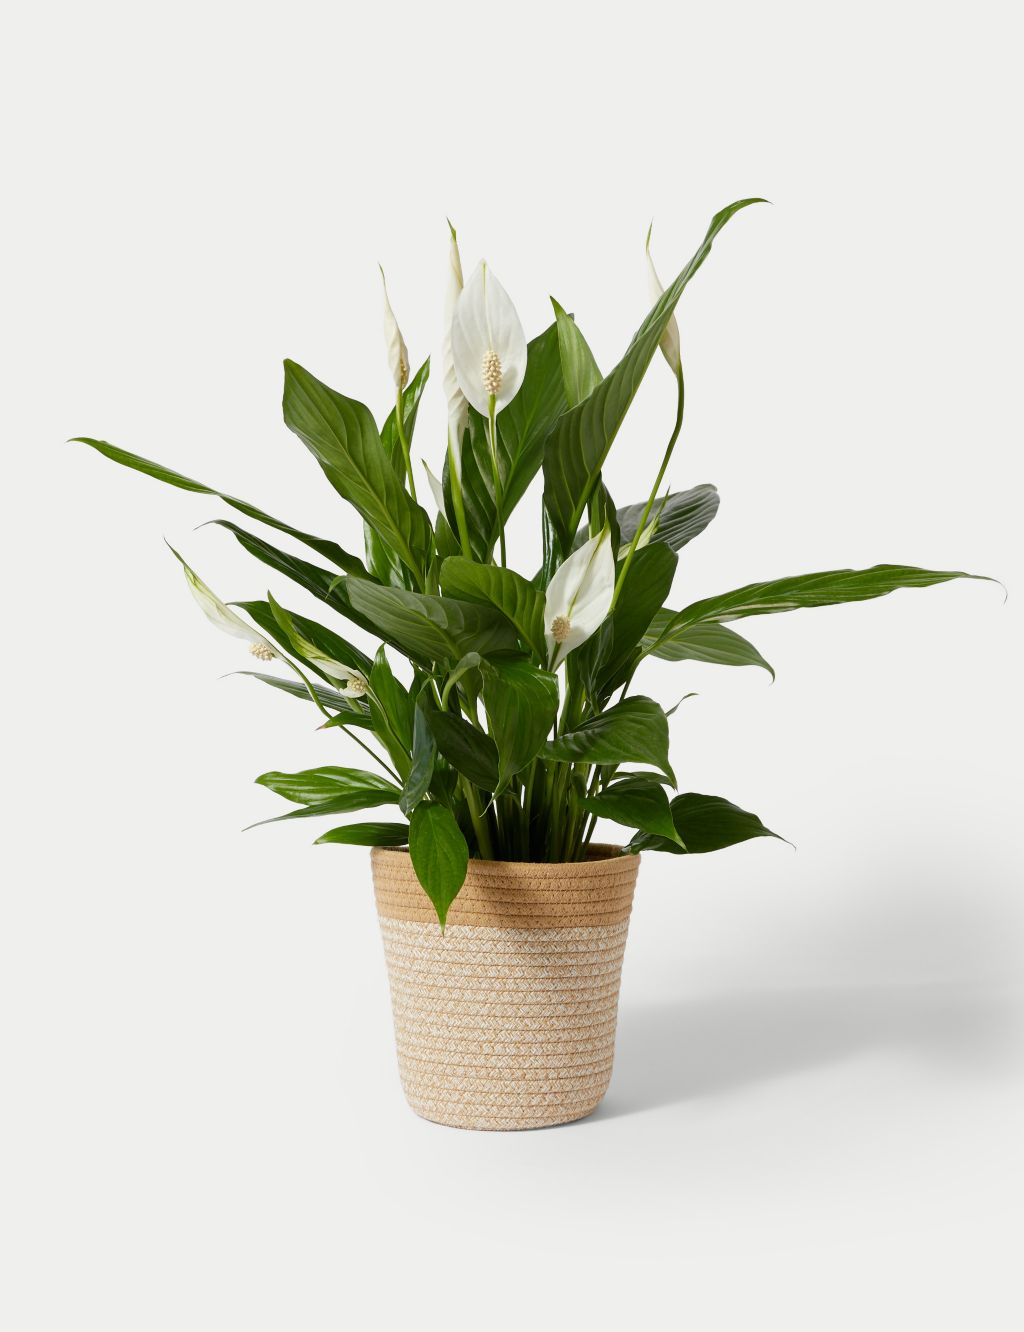 Large Peace Lily in Basket image 2